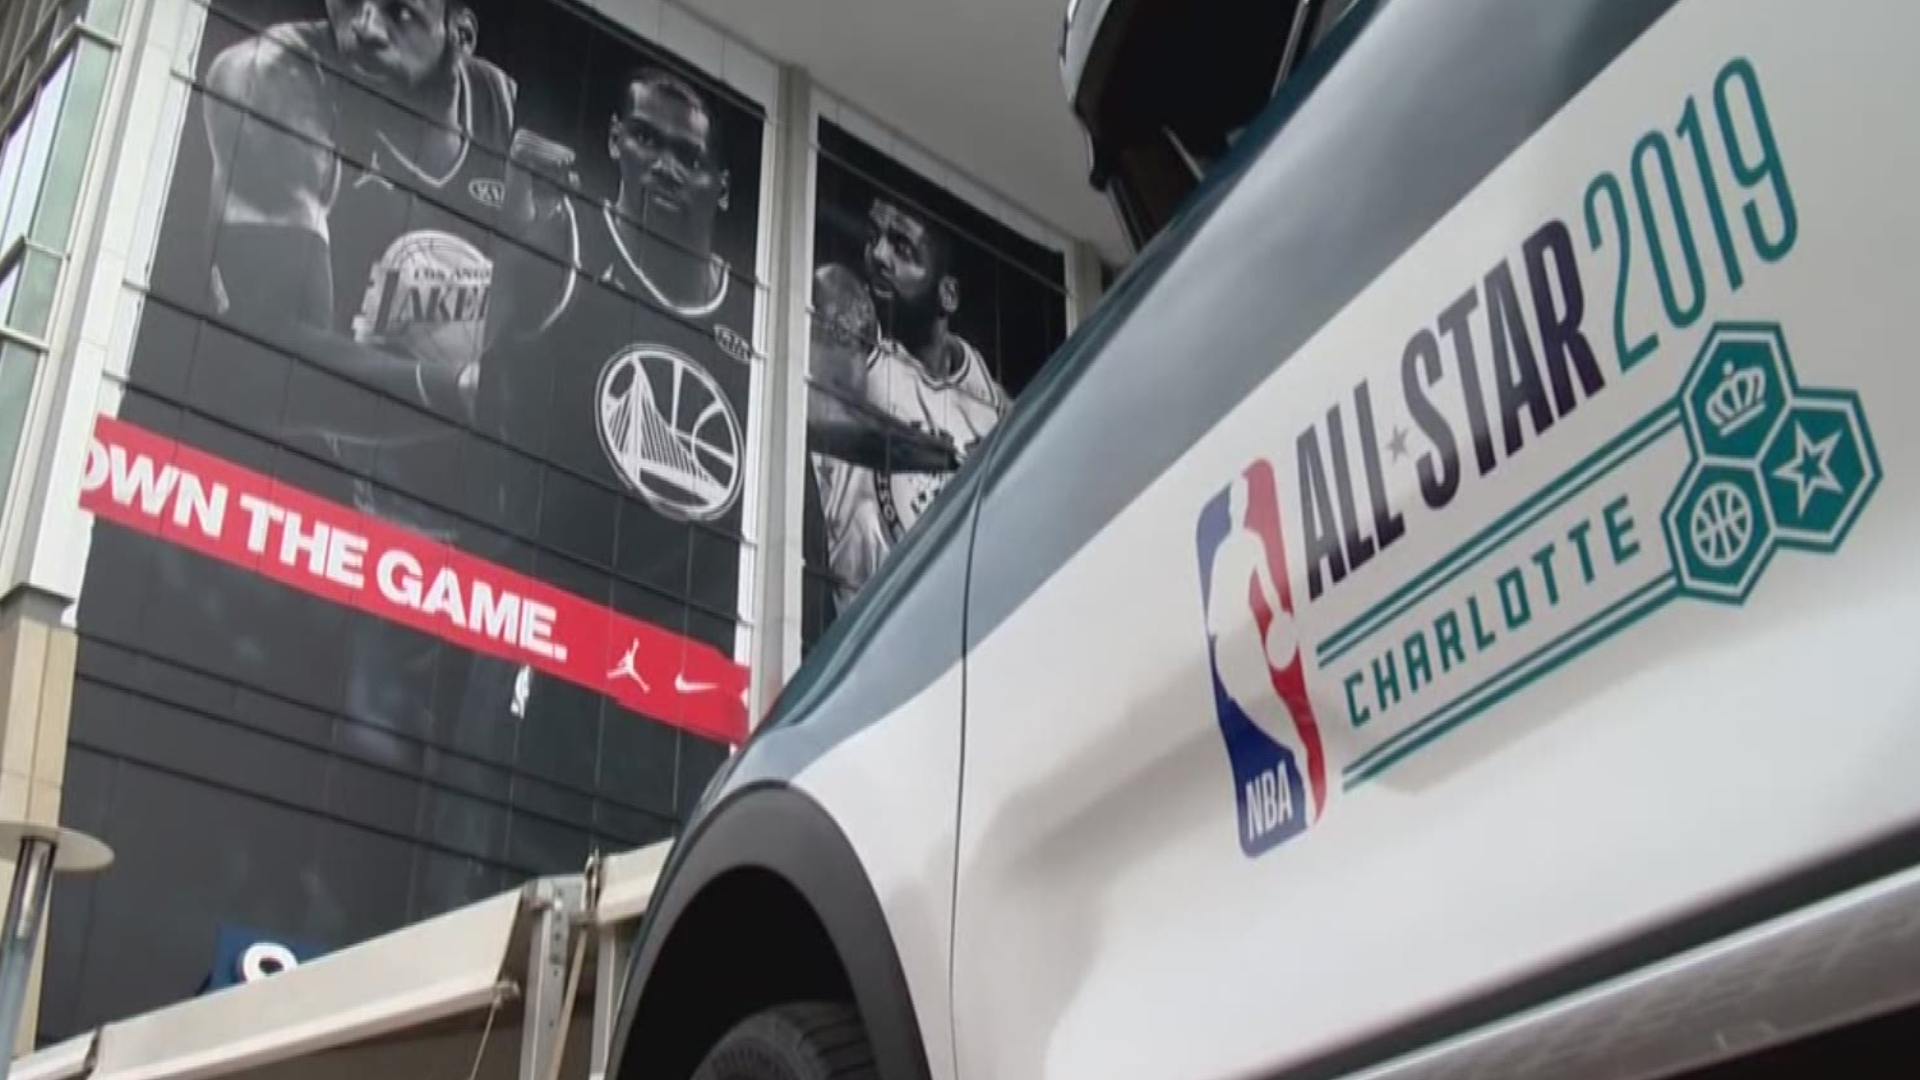 Charlotte is gearing up for its biggest sporting event ever with thousands of people flocking to the Queen City for the 2019 NBA All-Star Weekend.